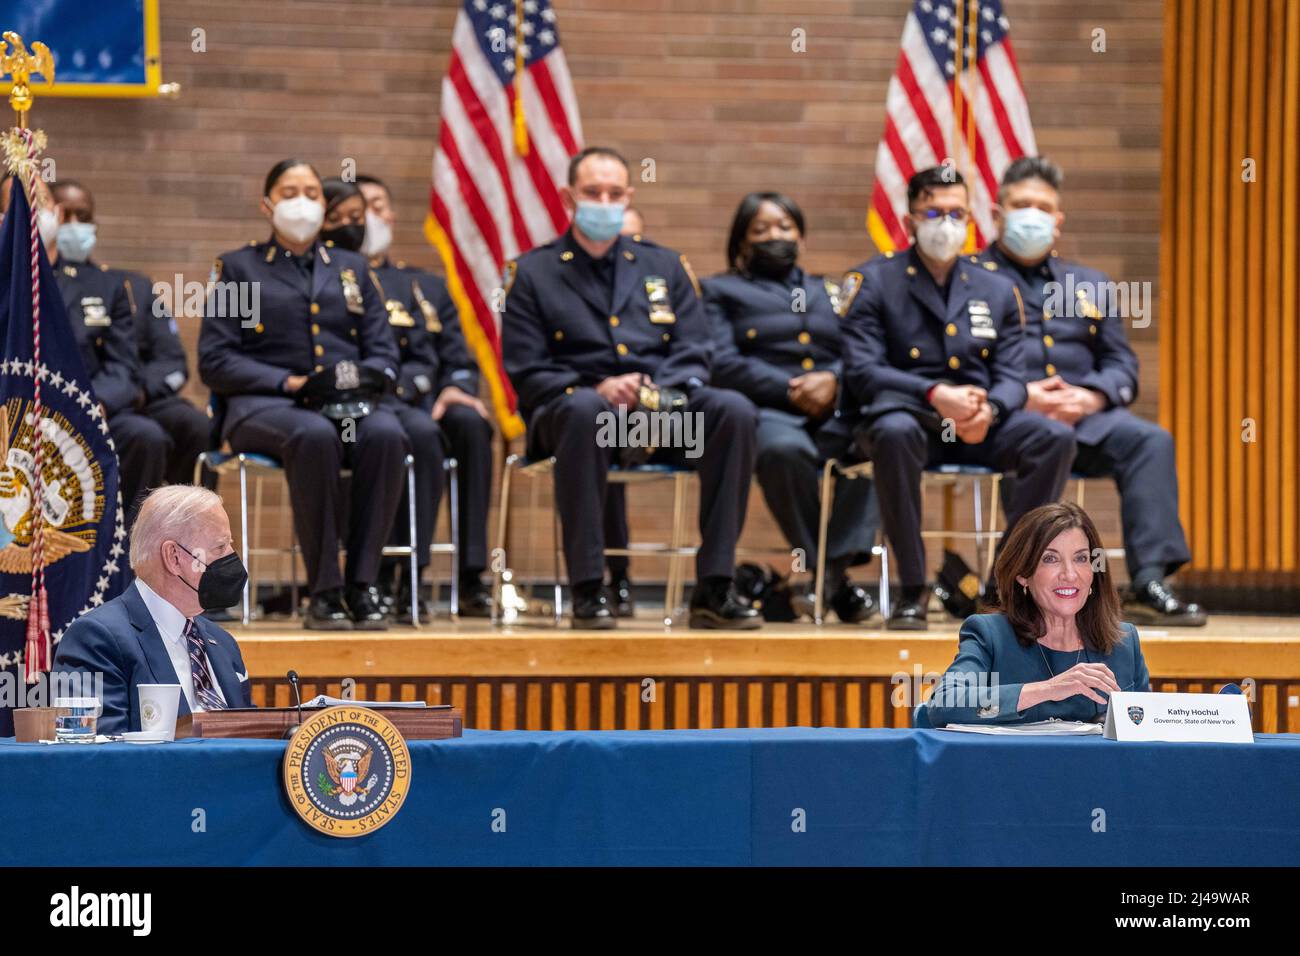 President Joe Biden, joined by New York Governor Kathy Hochul, participates in a Gun Violence Prevention Task Force meeting, Thursday, February 3, 2022, at NYPD Headquarters in New York. (Official White House Photo by Adam Schultz) Stock Photo